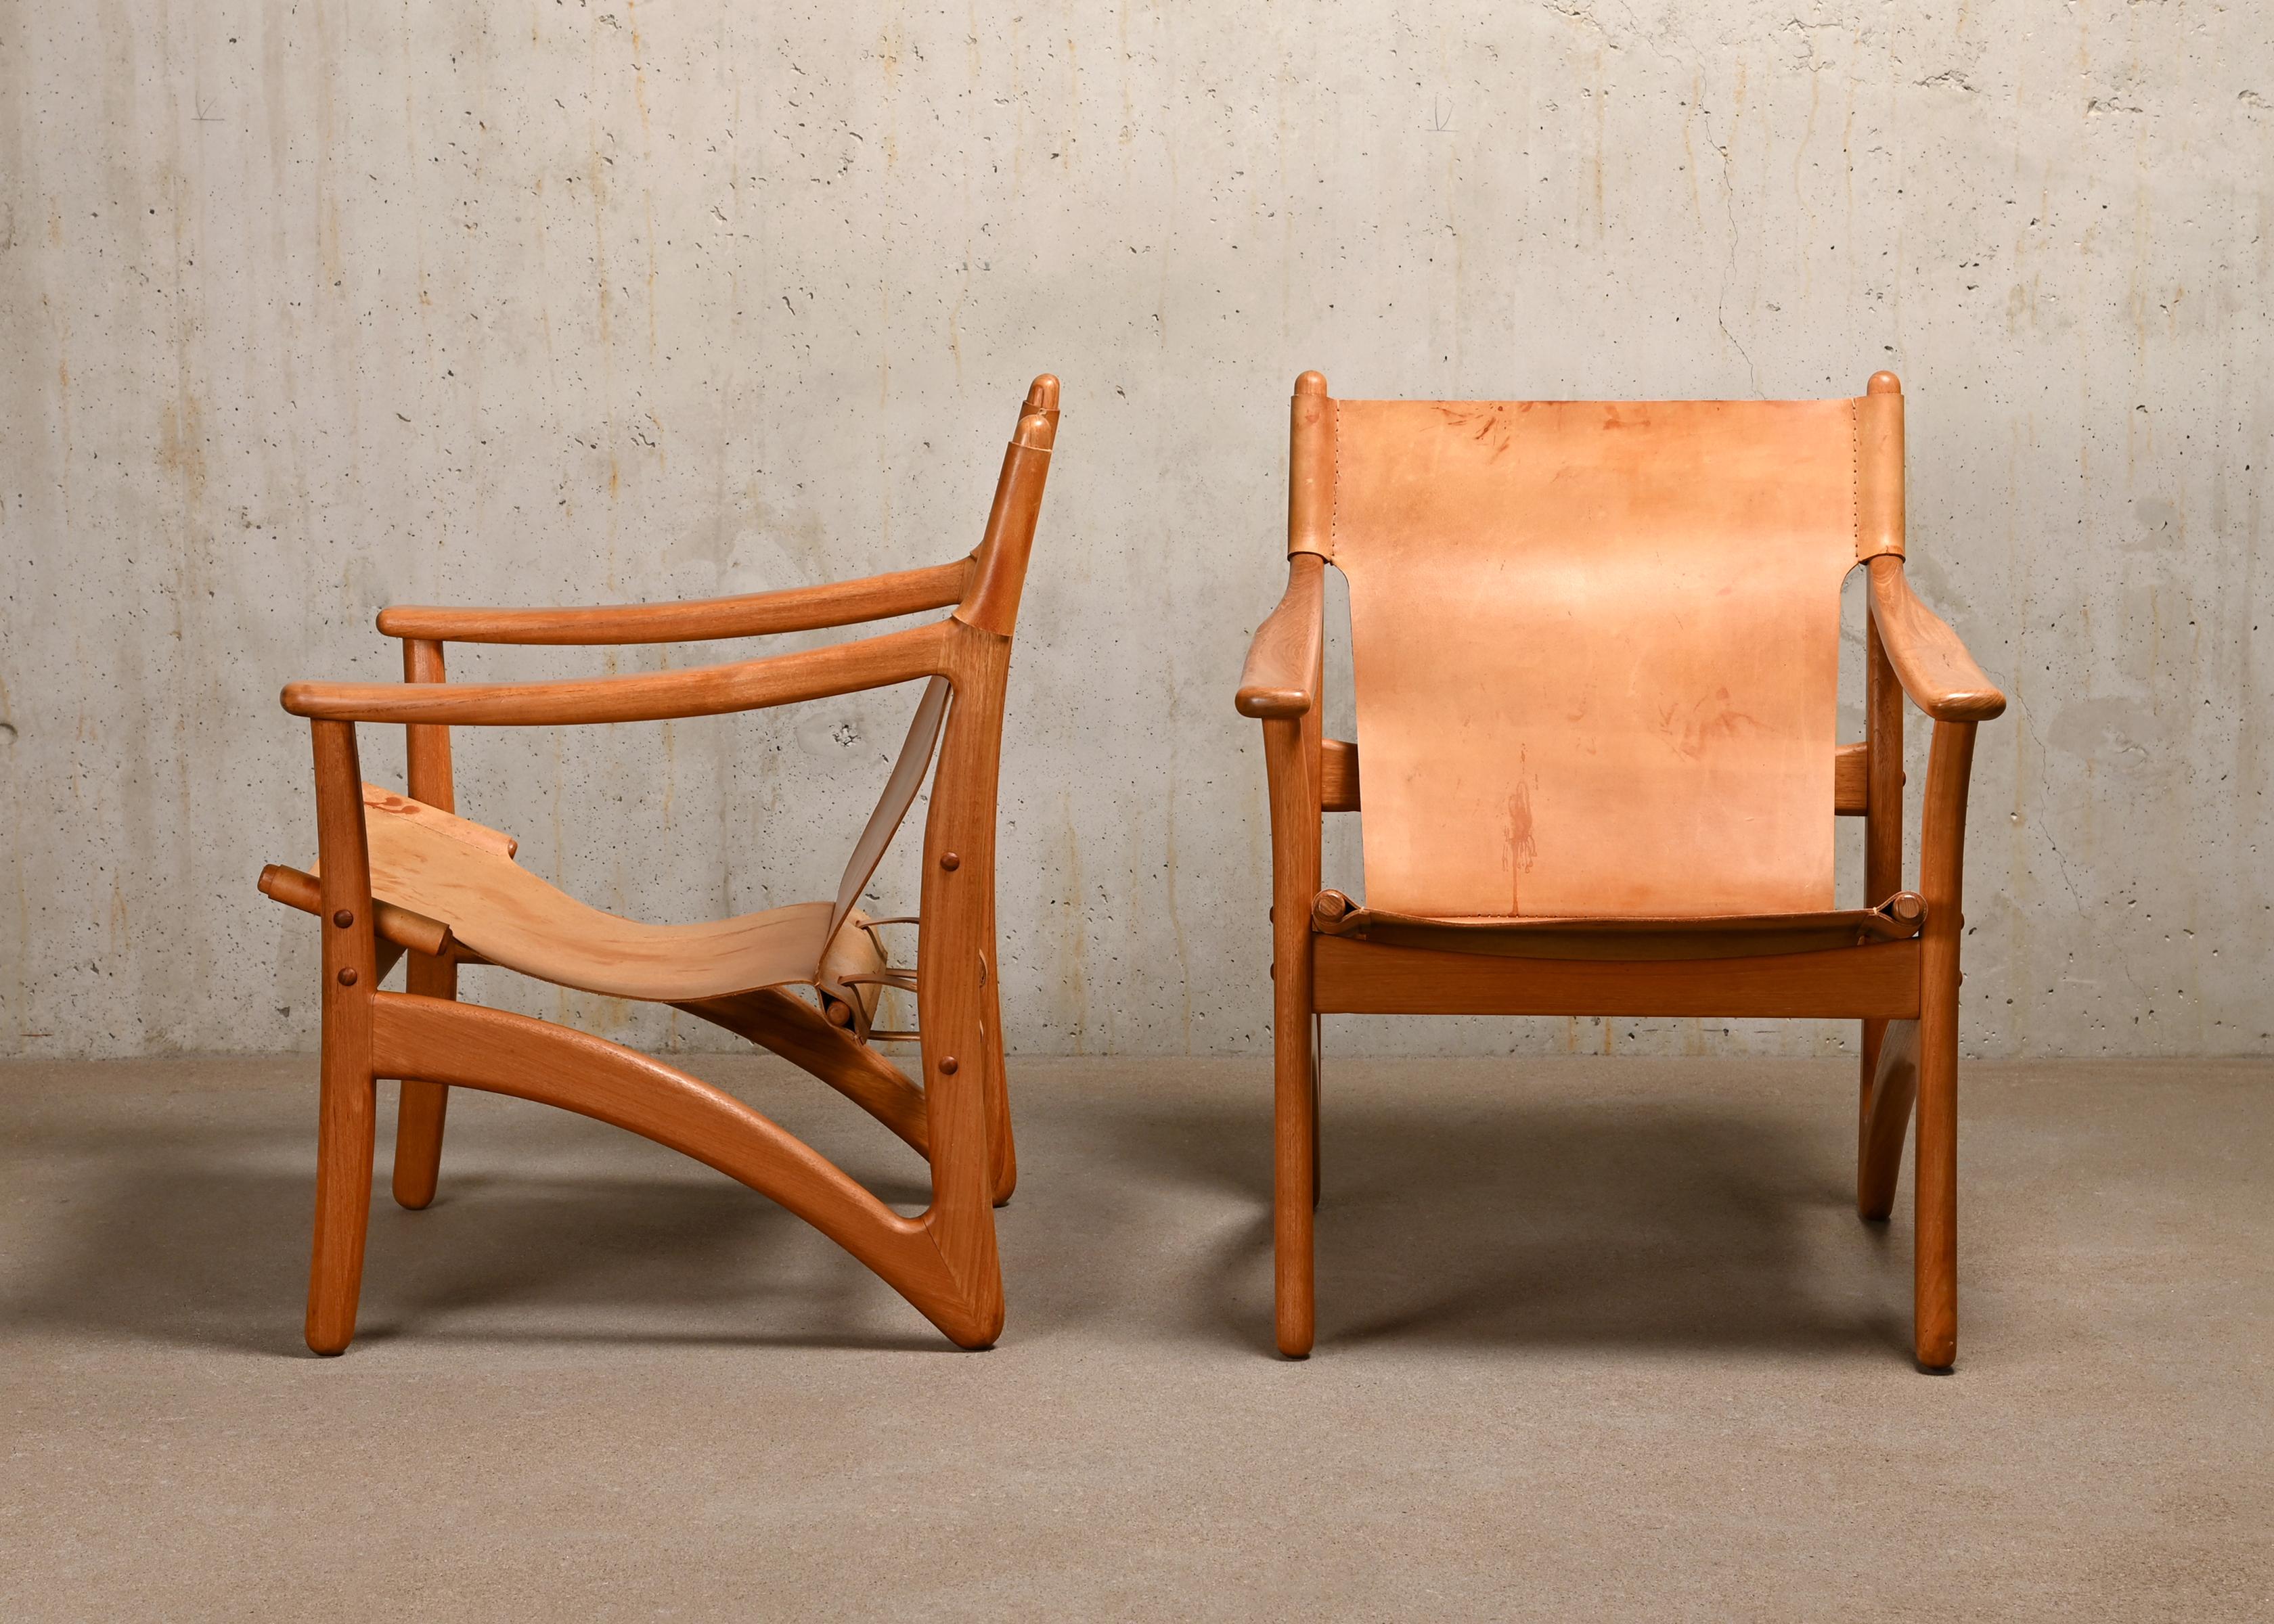 Beautiful and hard to find Arne Vodder hunting lounge chairs manufactured by Kircodan Furniture, Denmark. Teak frame and cognac coloured patined saddle leather. Very good condition with minimal wear and signed with manufacture label.

The chairs